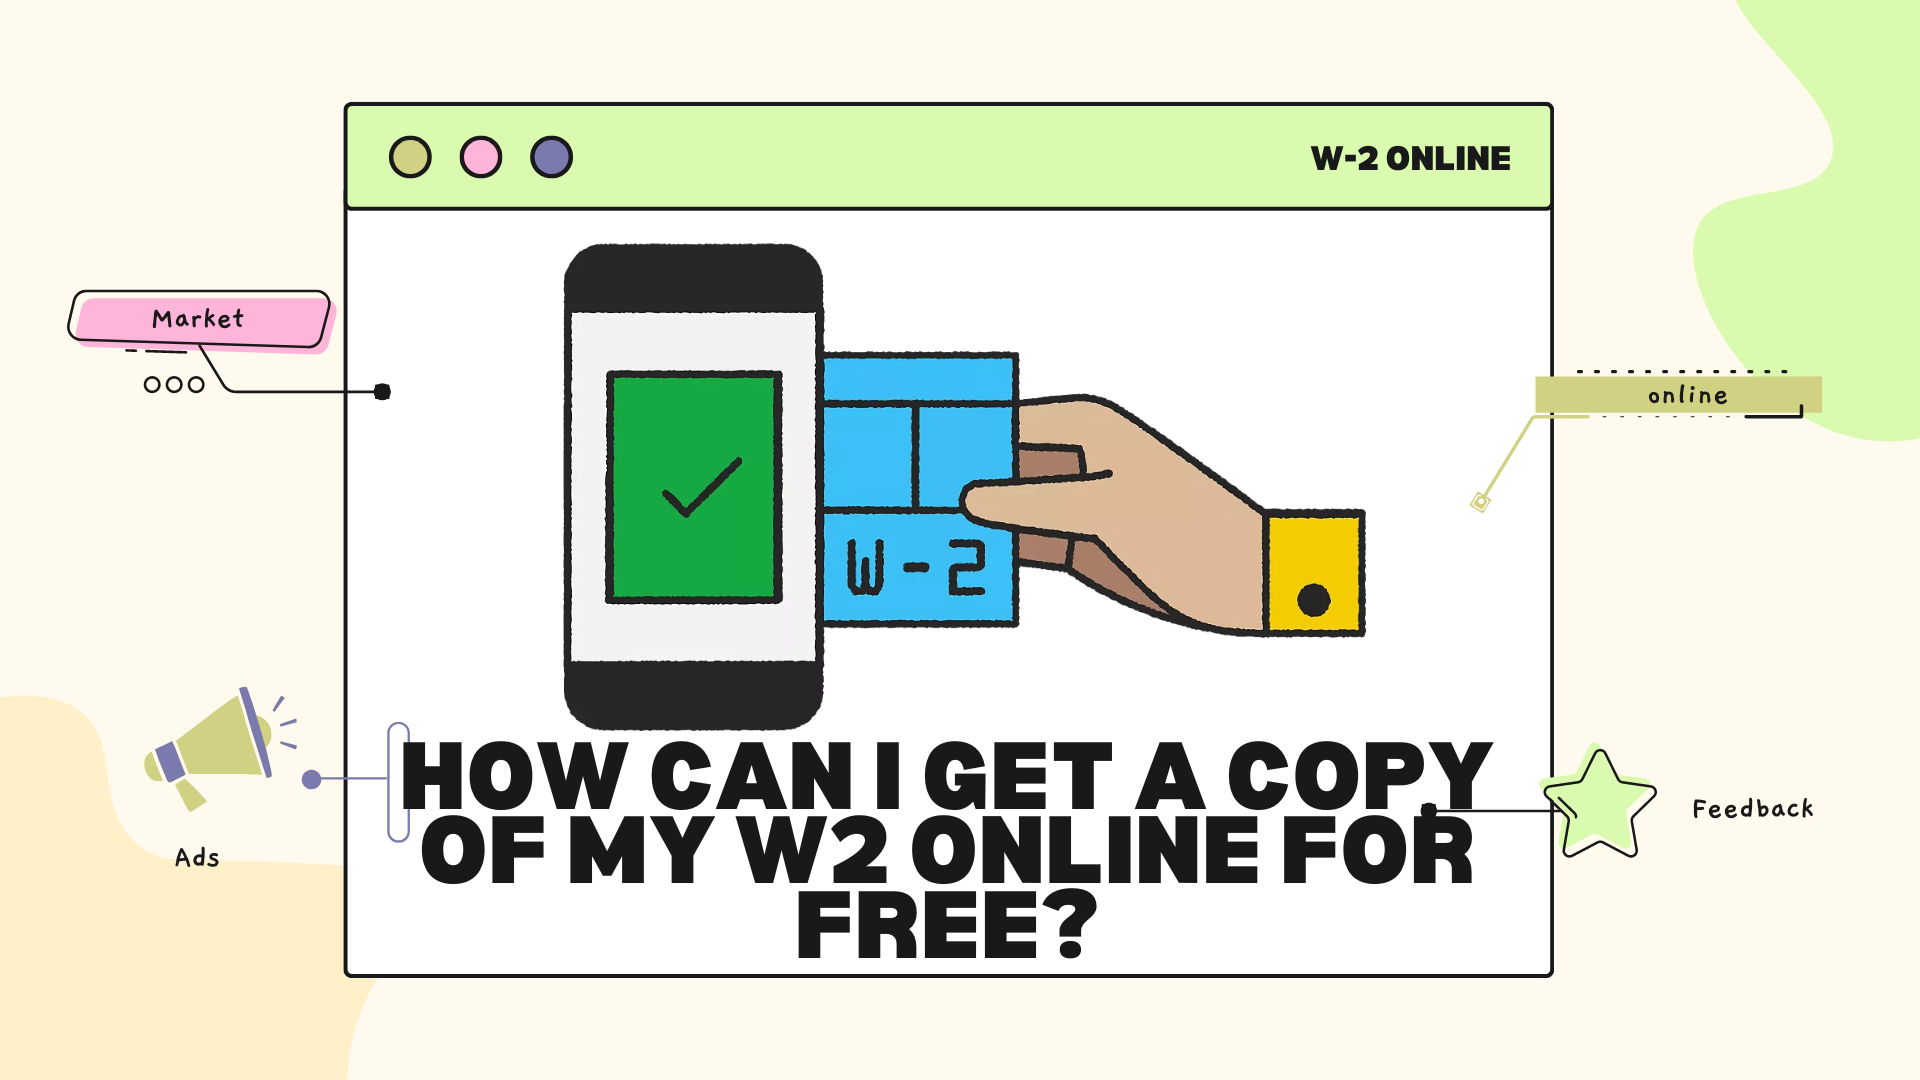 How Can I Get a Copy of My W2 Online for Free